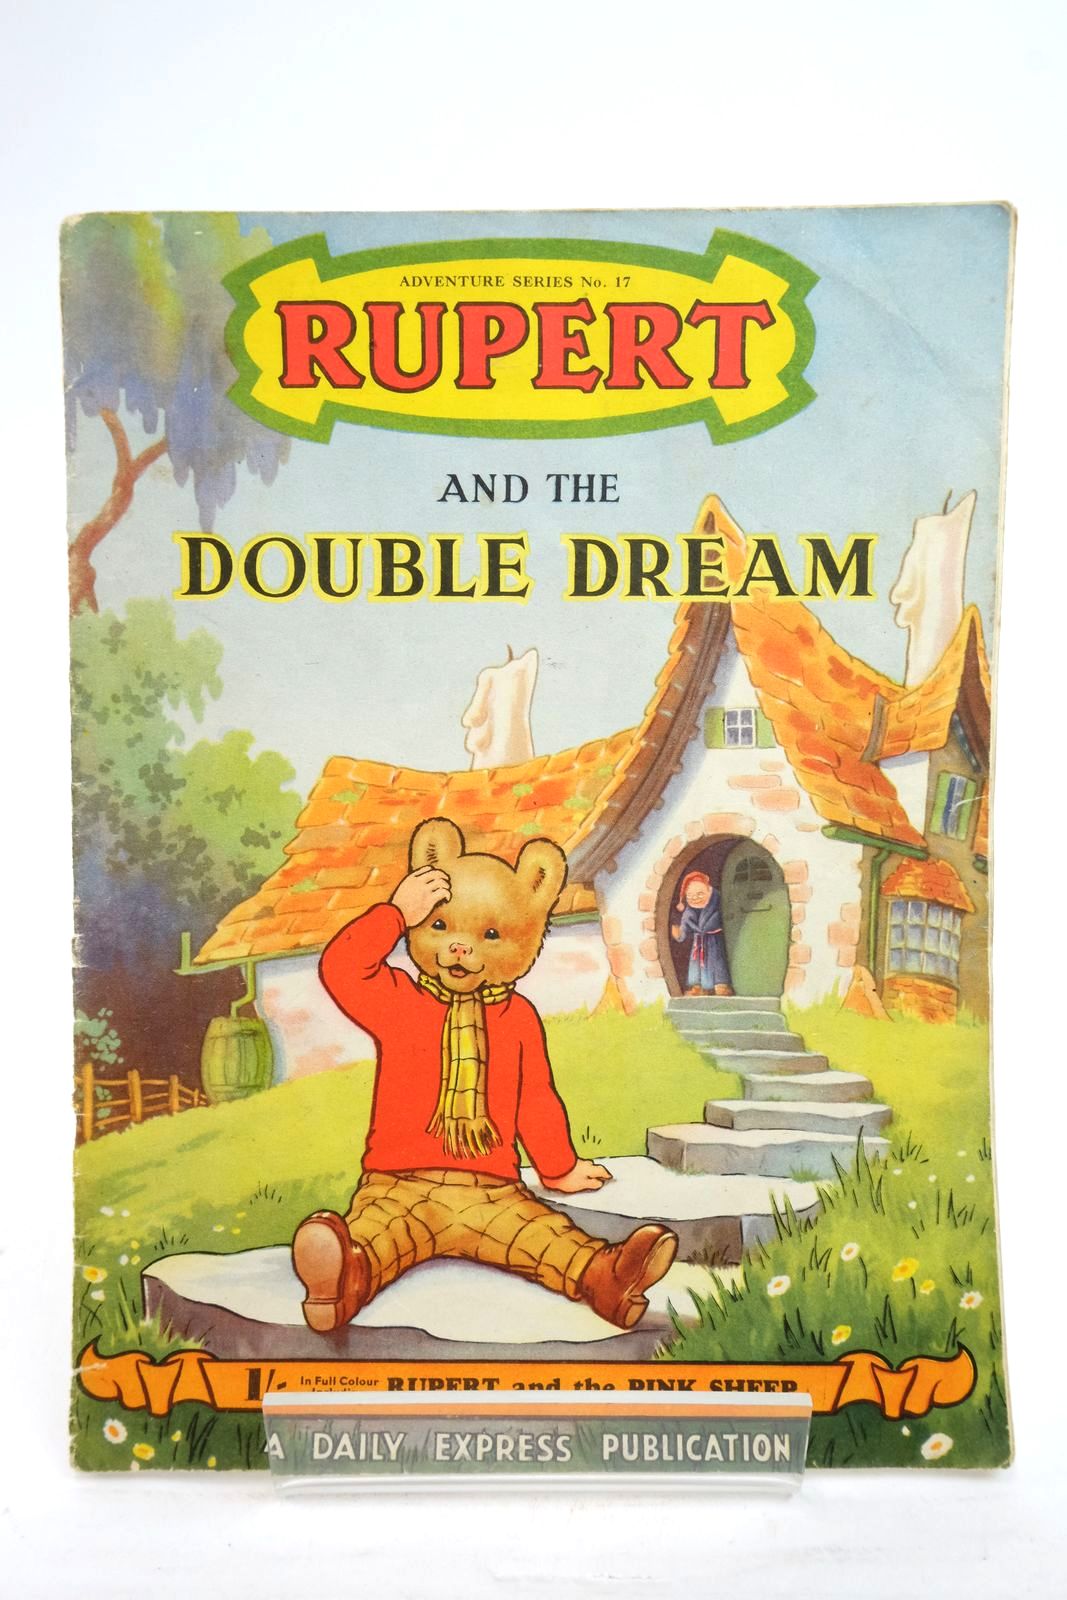 Photo of RUPERT ADVENTURE SERIES No. 17 - RUPERT AND THE DOUBLE DREAM written by Bestall, Alfred published by Daily Express (STOCK CODE: 2137194)  for sale by Stella & Rose's Books